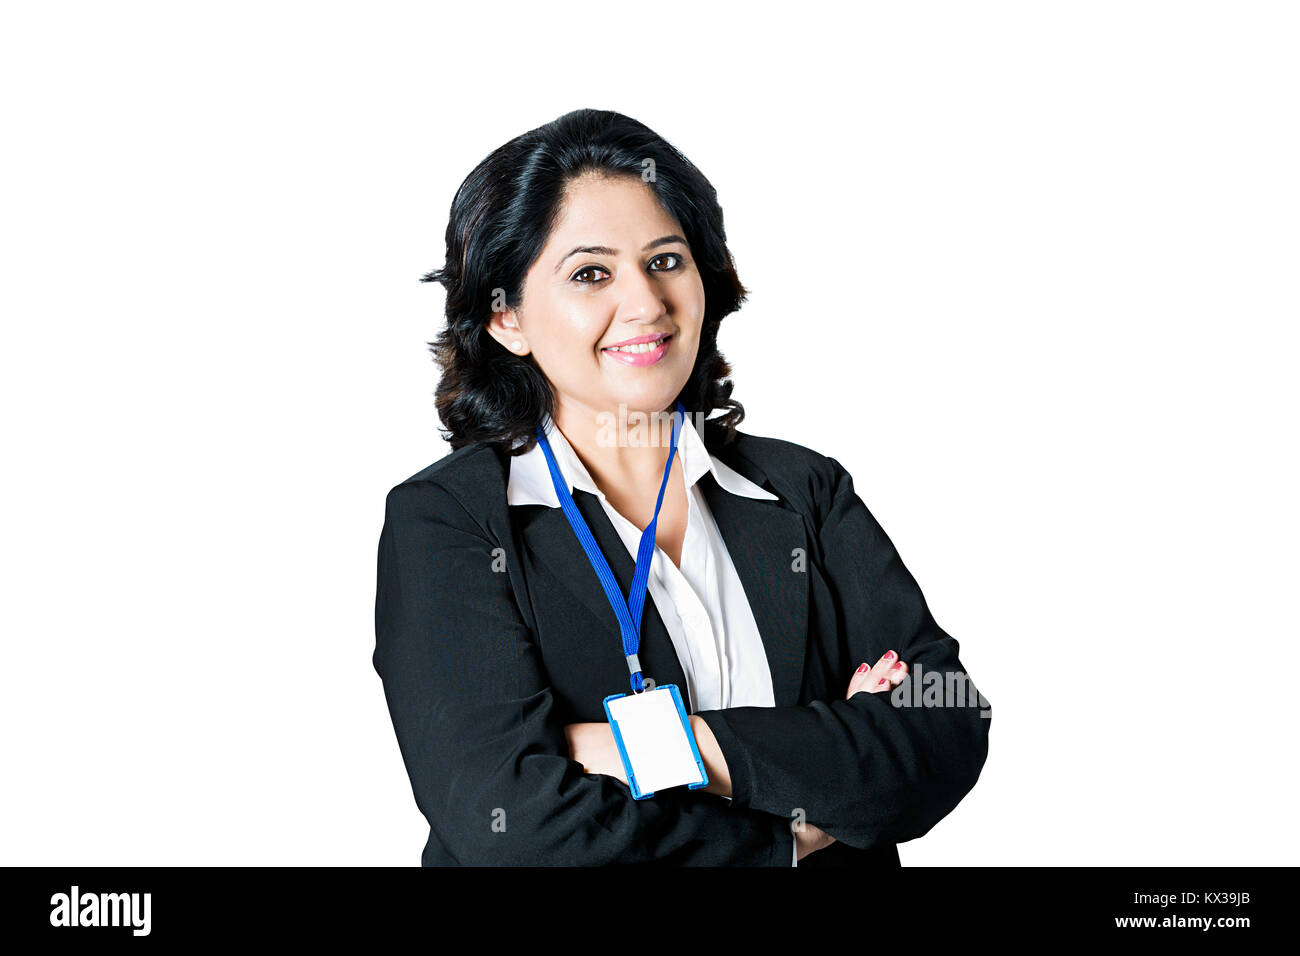 Indian Business Saleswoman Arms Crossed Standing Smiling Stock Photo